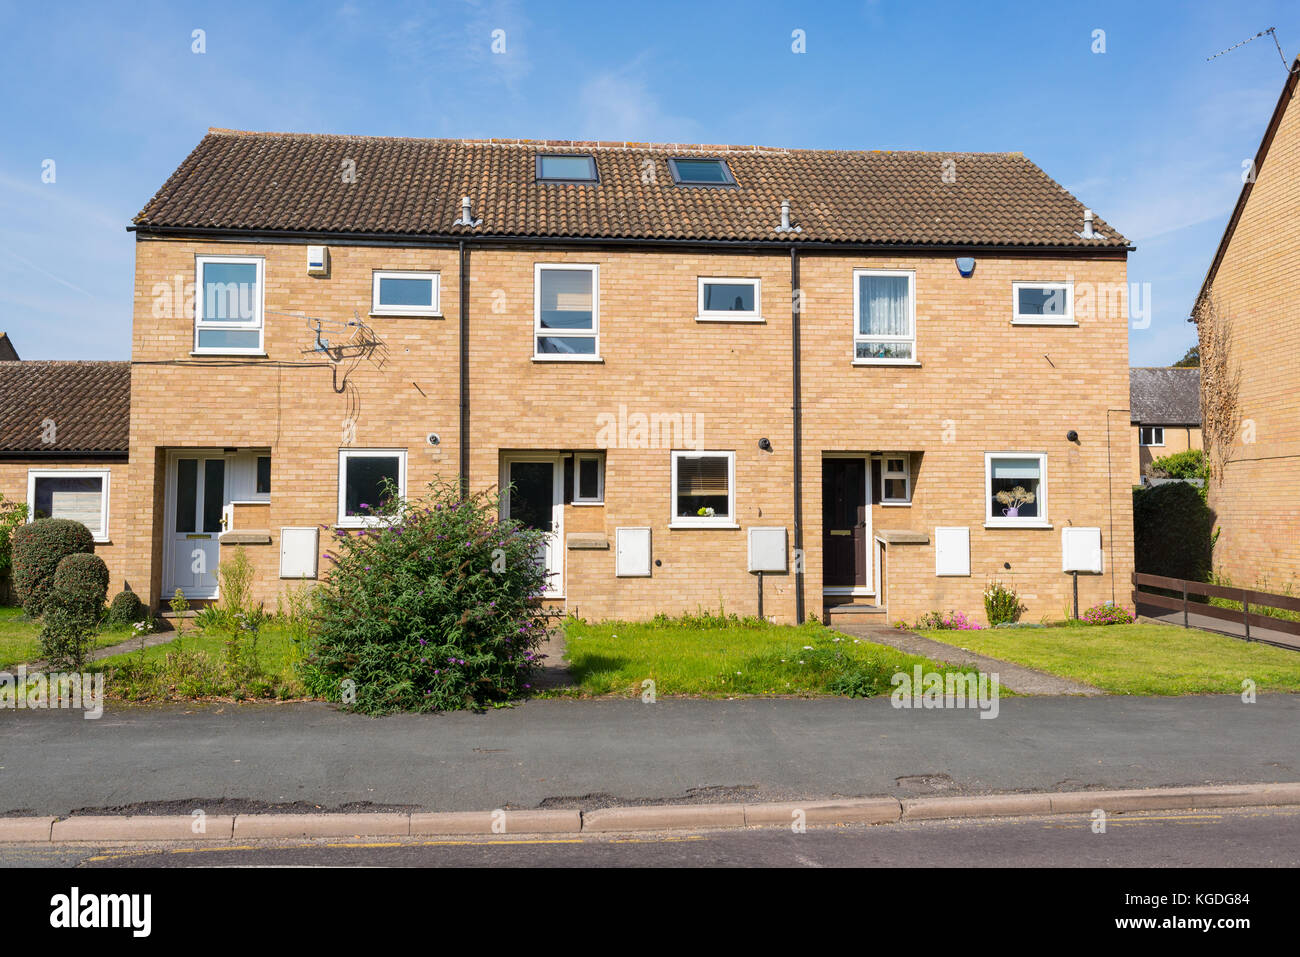 Newly built two floors semi detached council houses with small garden in the front on an empty street in England, UK Stock Photo